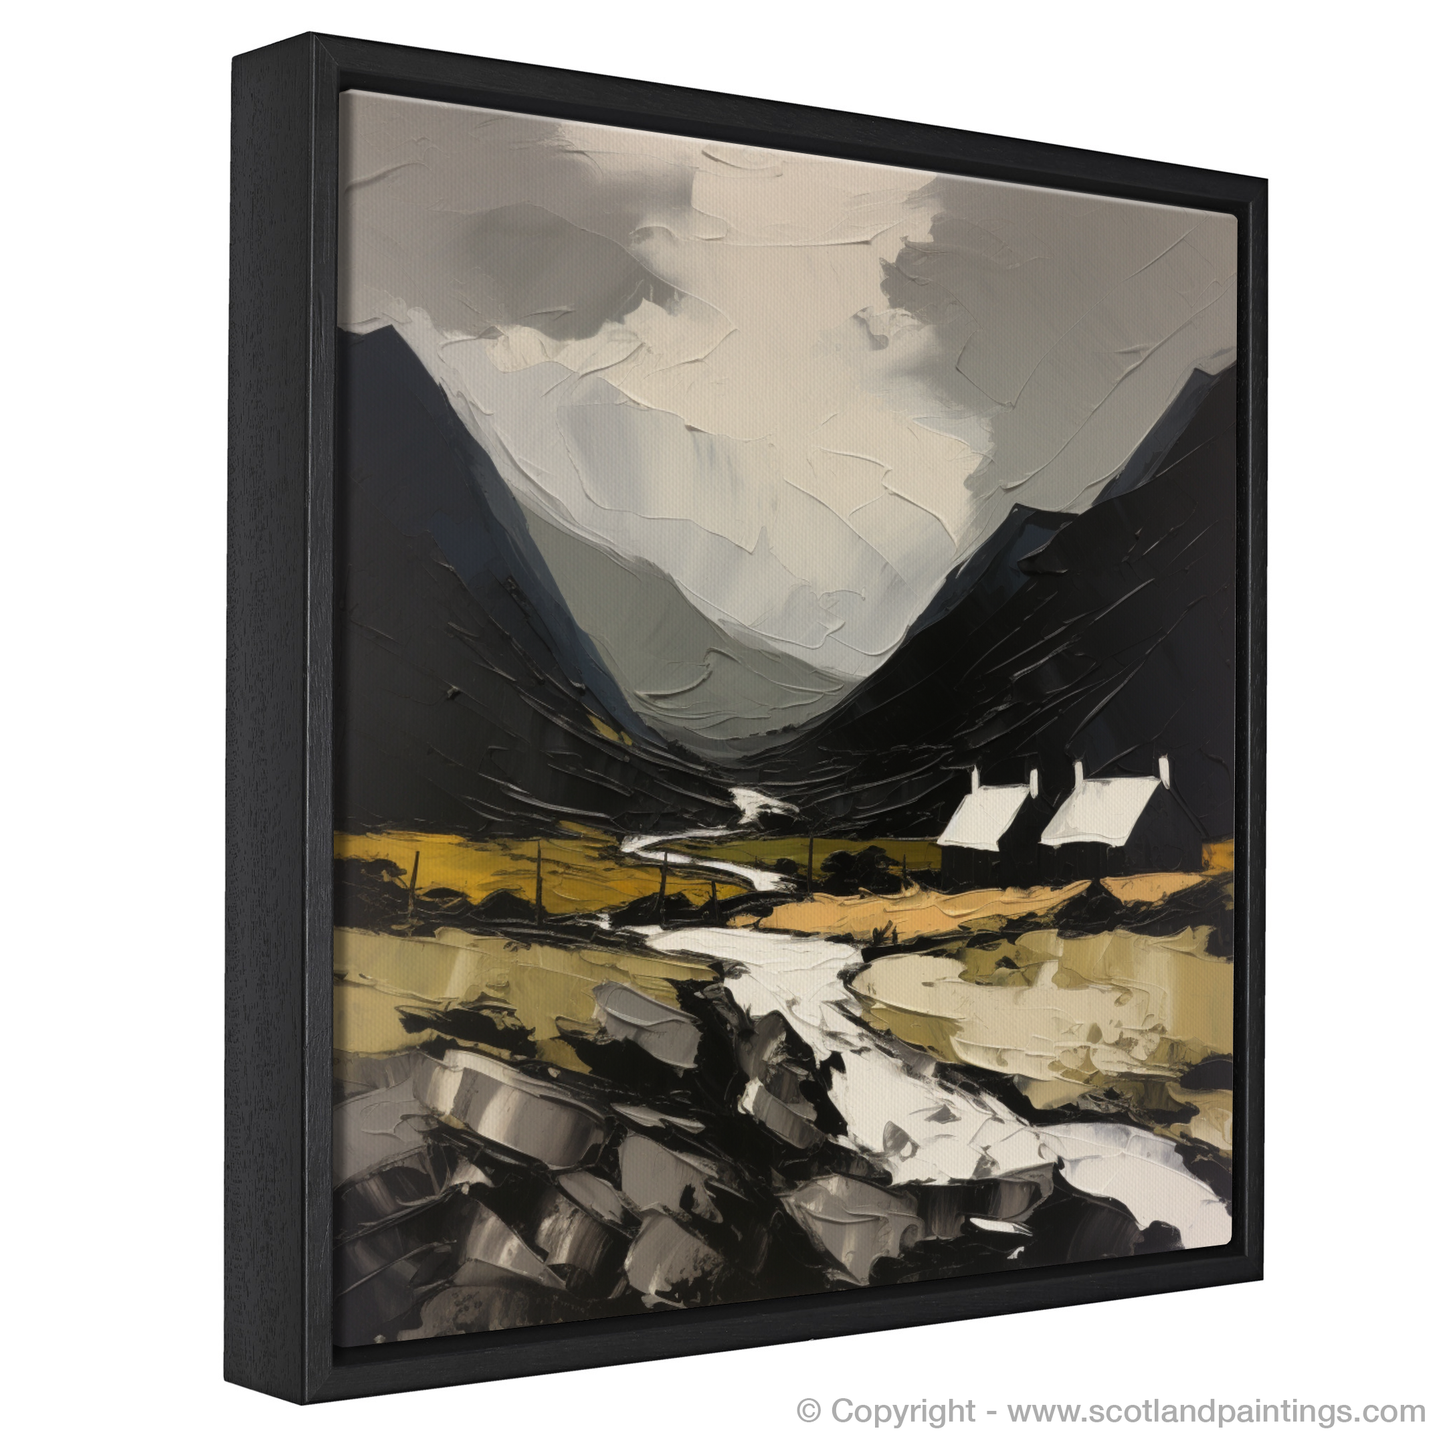 Painting and Art Print of Creag Leacach entitled "Majestic Creag Leacach: An Expressionist Interpretation".